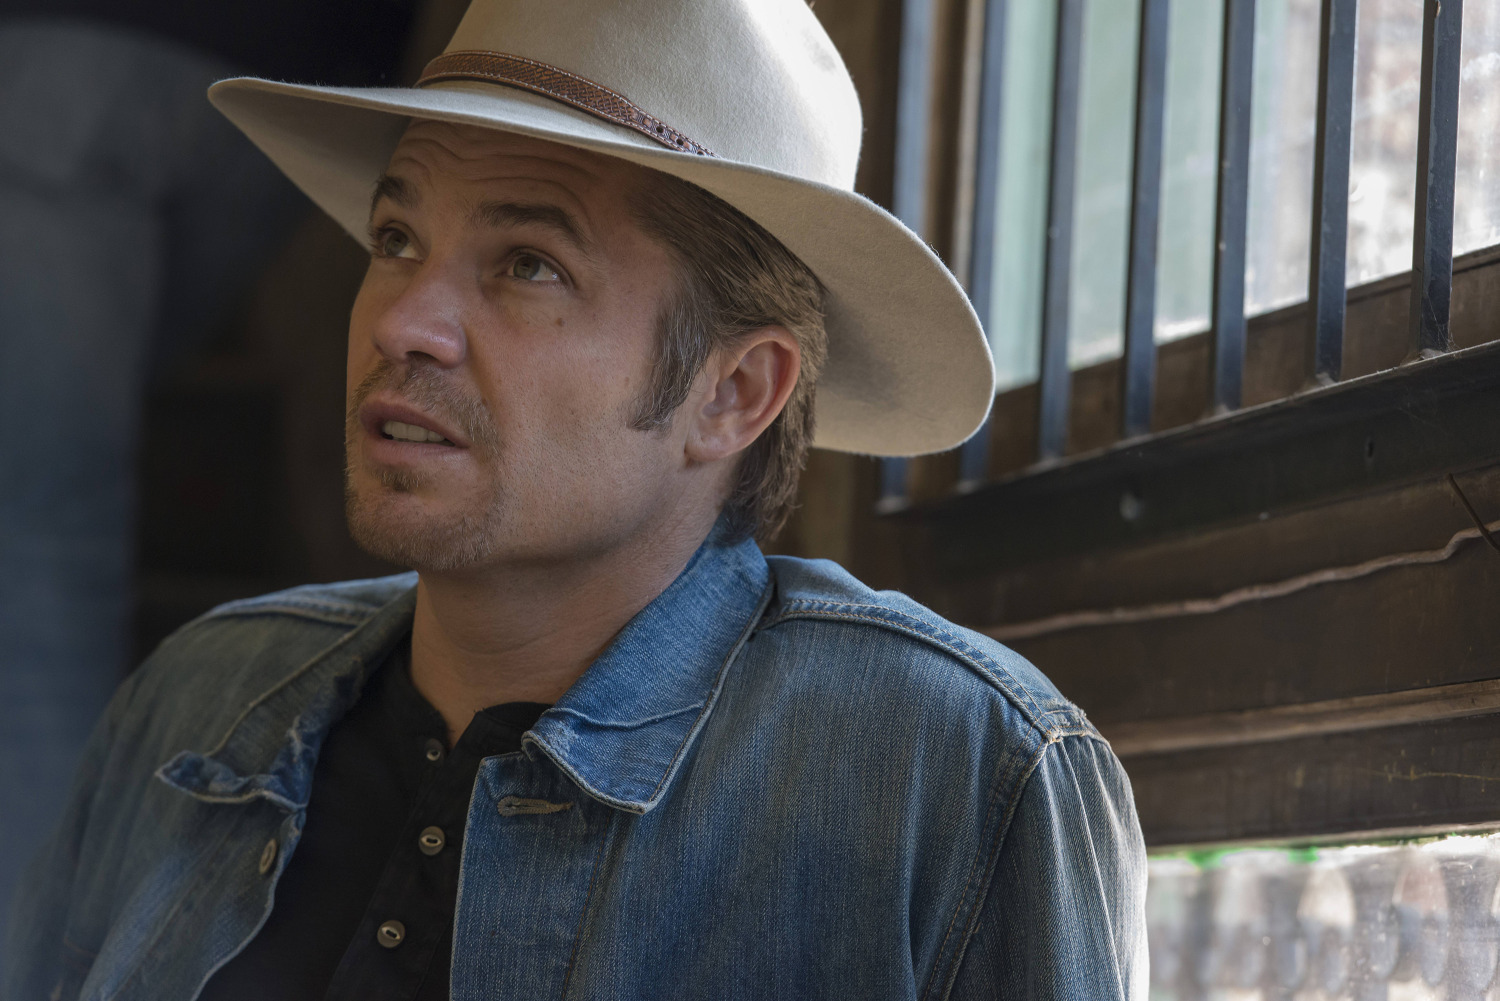 JUSTIFIED -- Raw Deal -- Episode 507 (Airs Tuesday, February 25, 10:00 pm e/p) -- Pictured: Timothy Olyphant as Deputy U.S. Marshal Raylan Givens -- CR: Prashant Gupta/FX